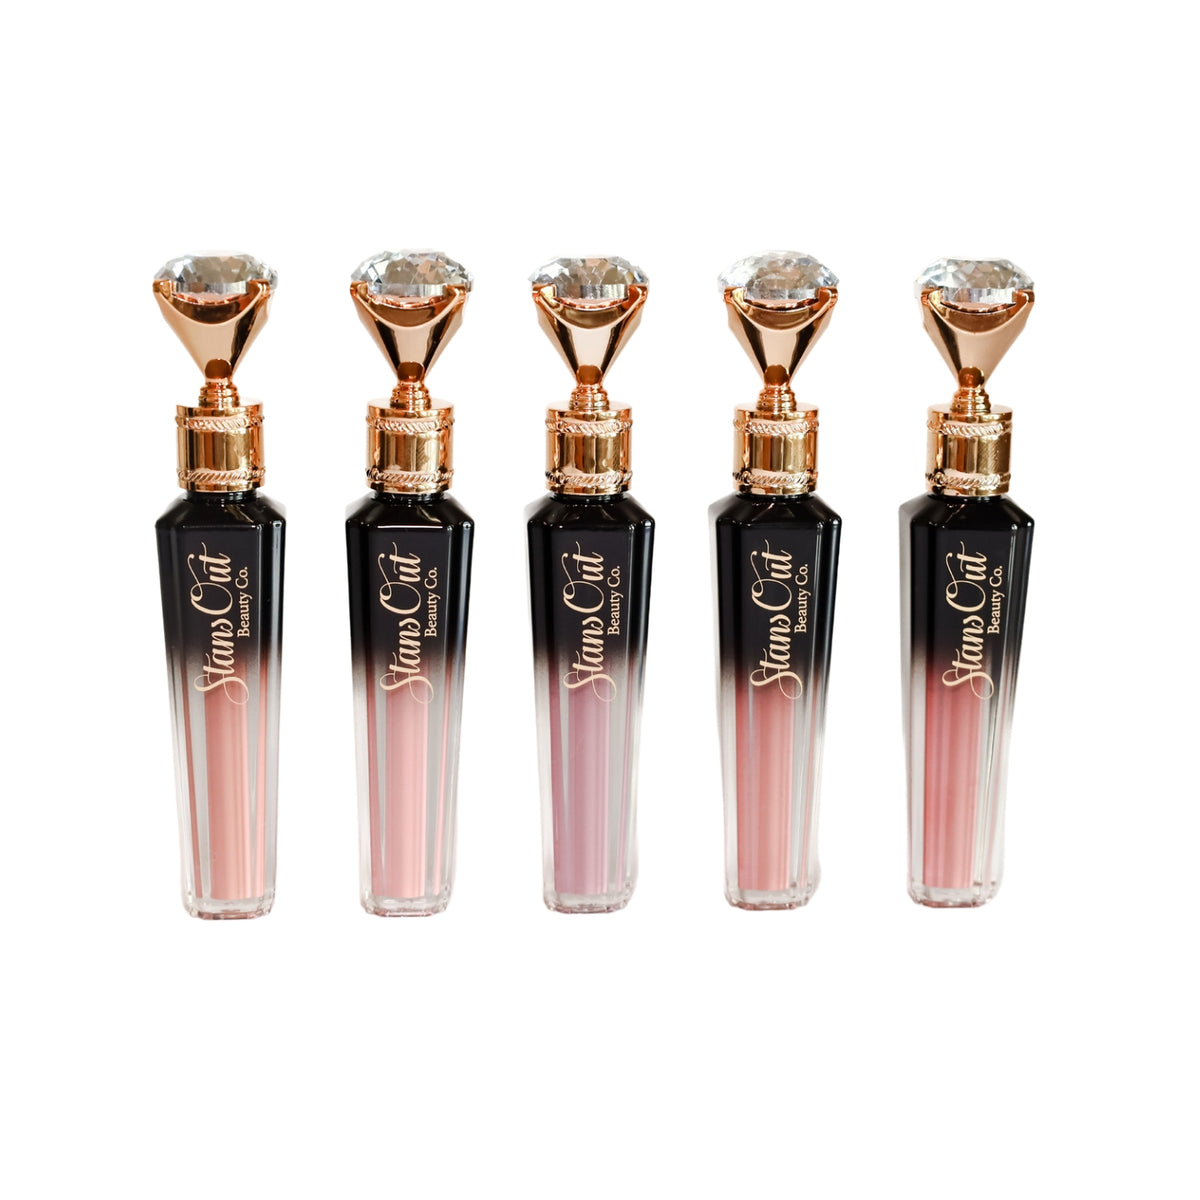 Highly Rated diamond lip gloss in all shades